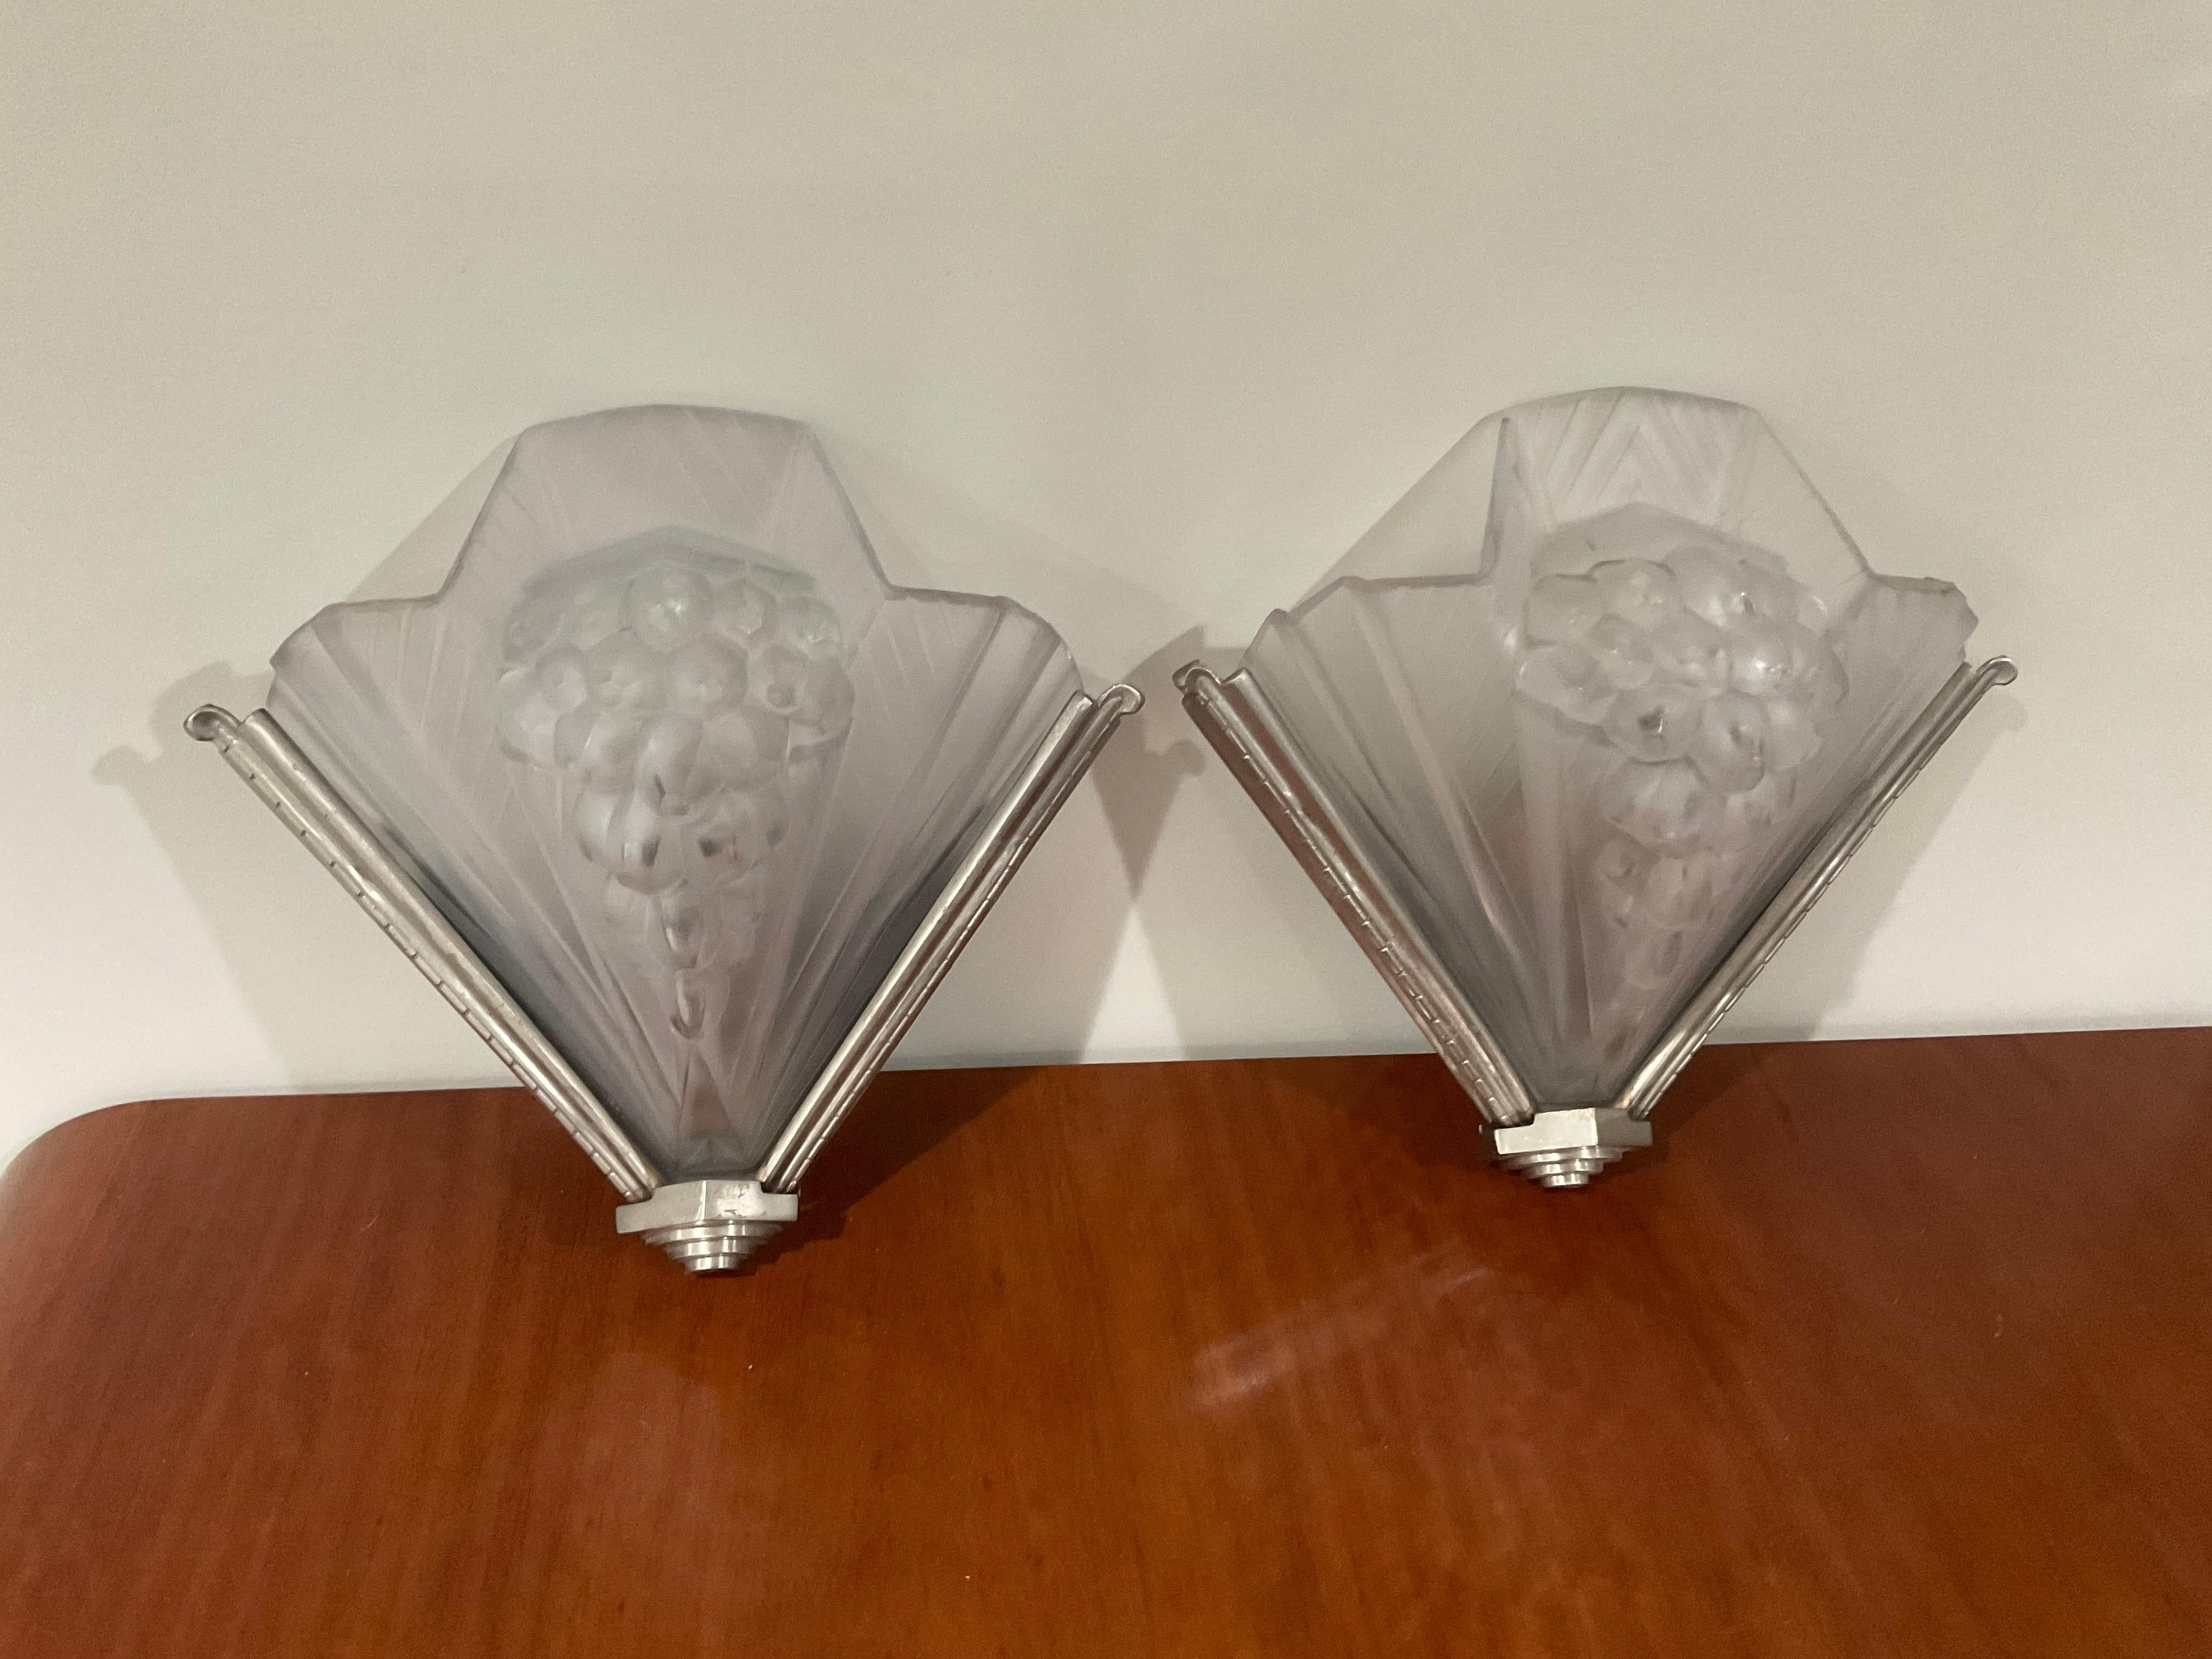 Pair French Art Deco Signed Art Glass Sconces with Original Mounts, circa 1930s In Good Condition For Sale In Ann Arbor, MI